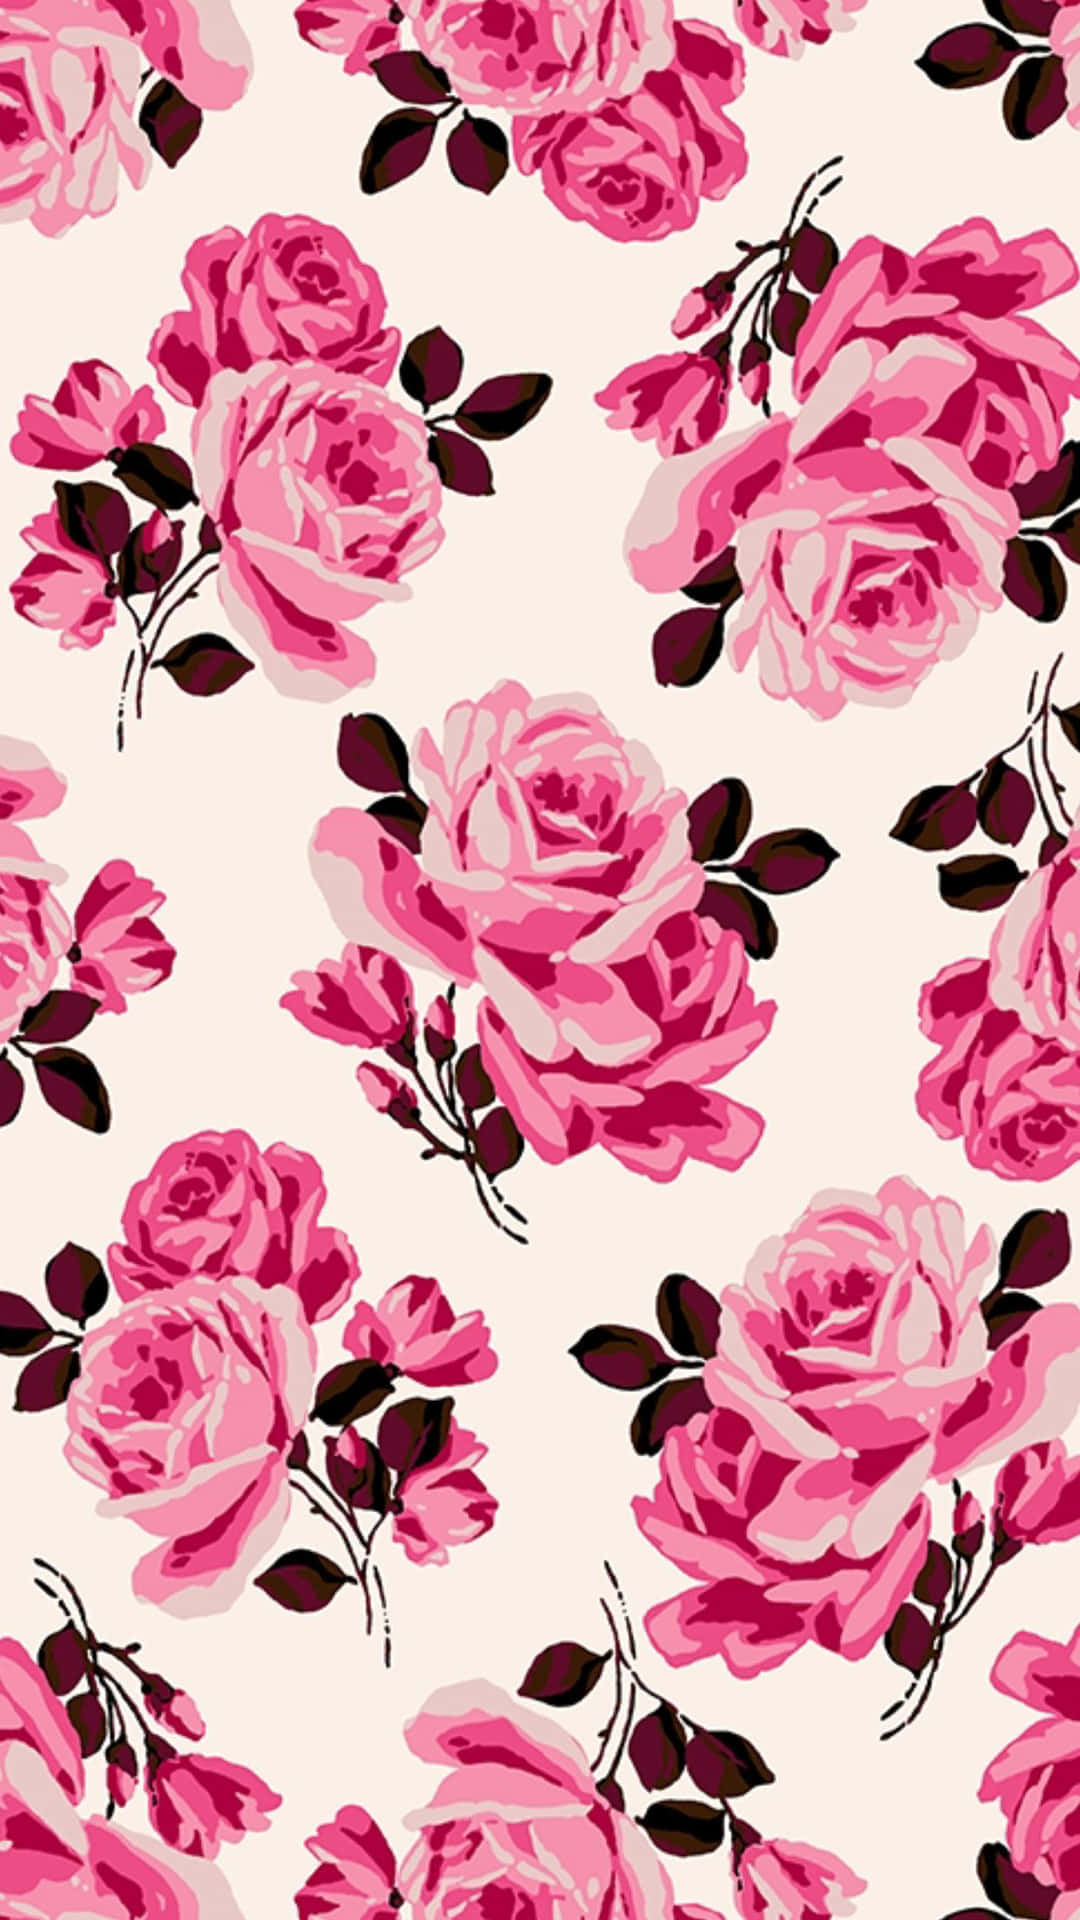 Adorable Flower Background Bursting with Blooms